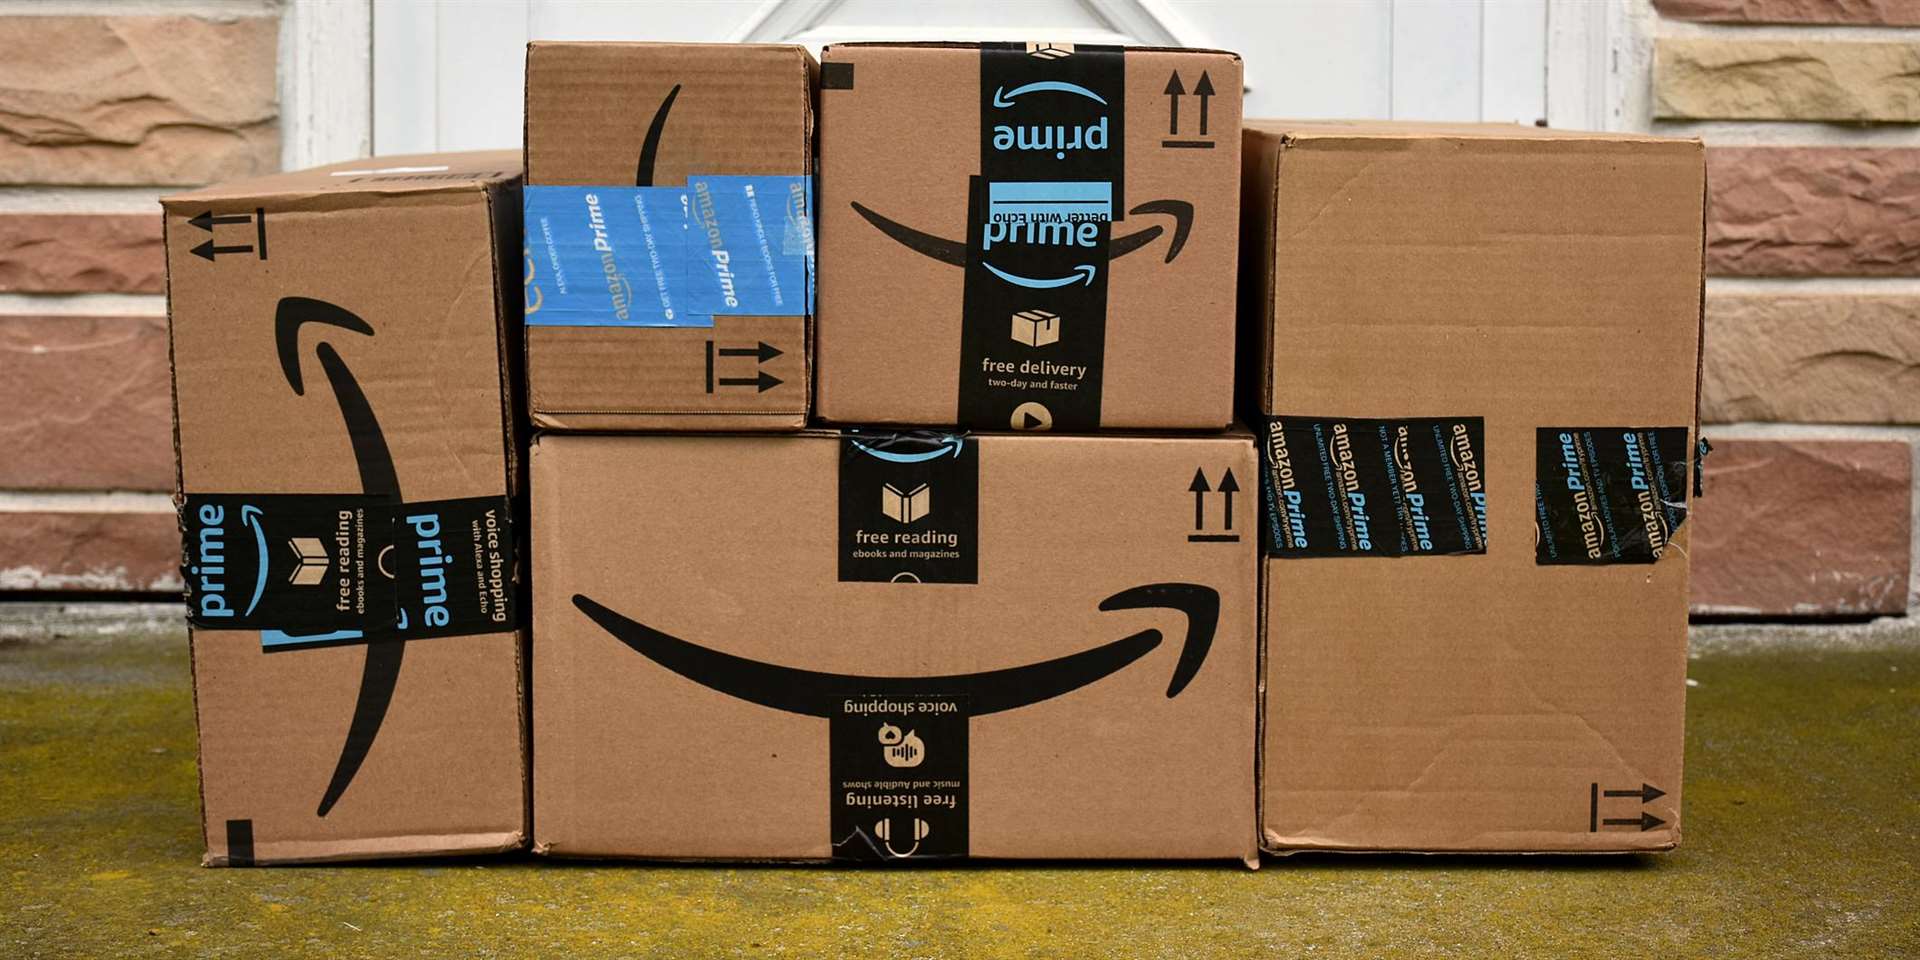 Amazon business offer business-only price savings, fast and easy shipping, multi-user accounts, flexible payment options and a wide range of product options